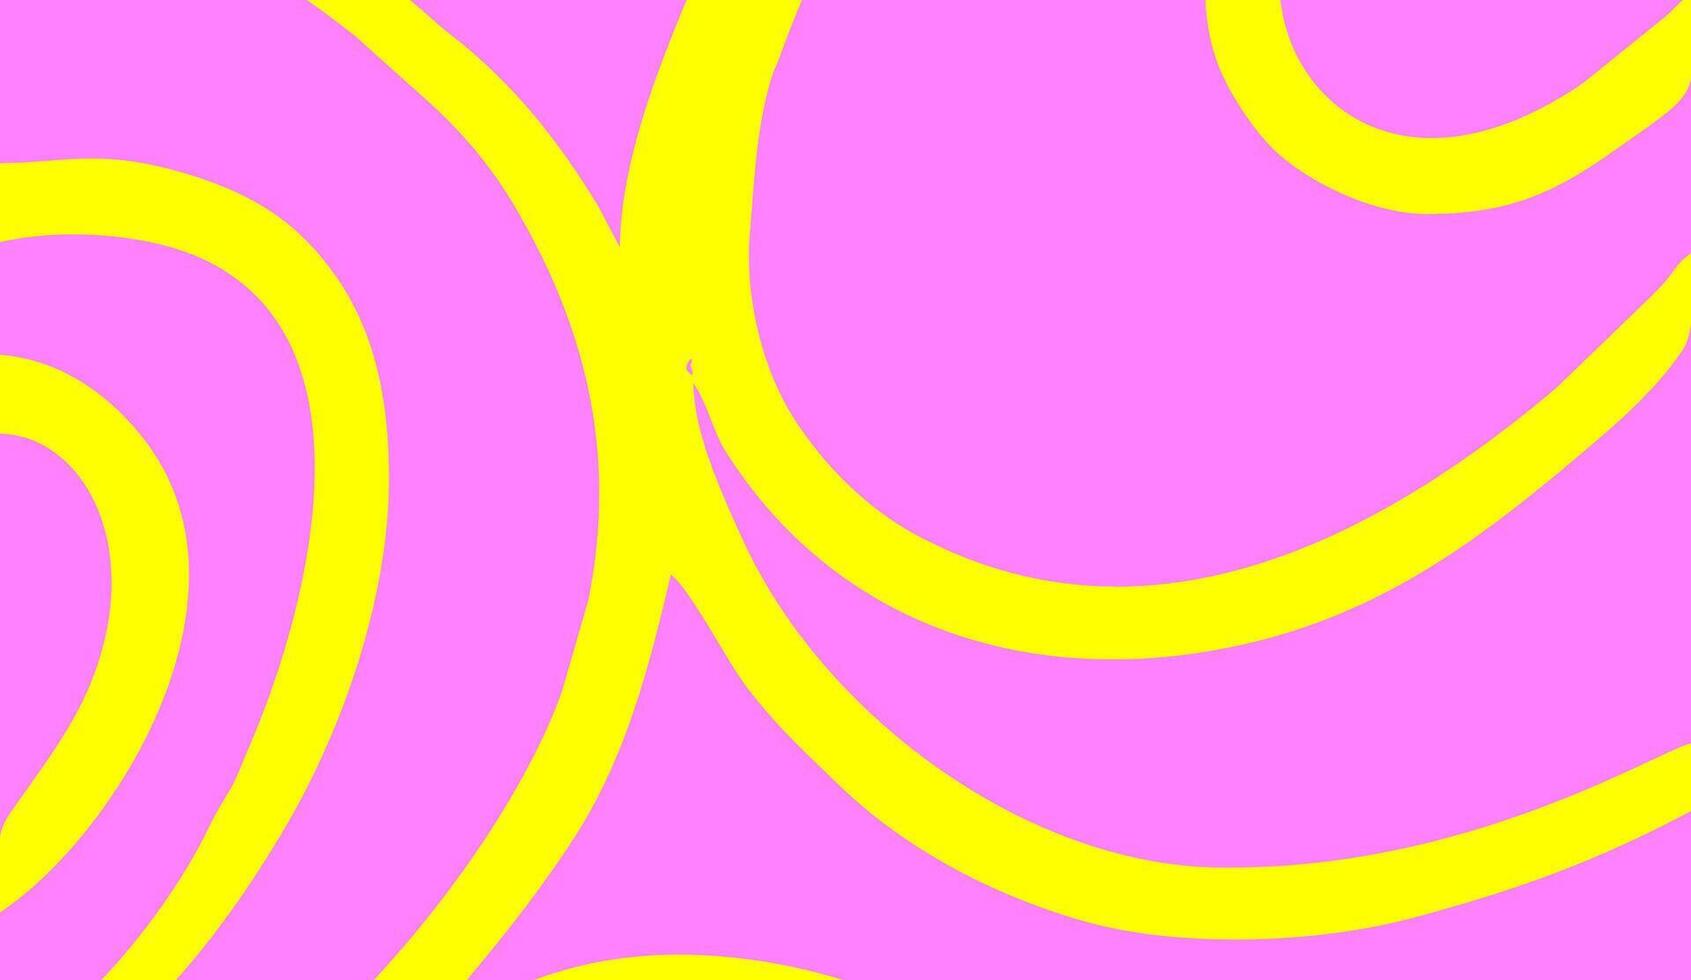 abstract stripes background .in modern pink and yellow colors and handdrawing style vector